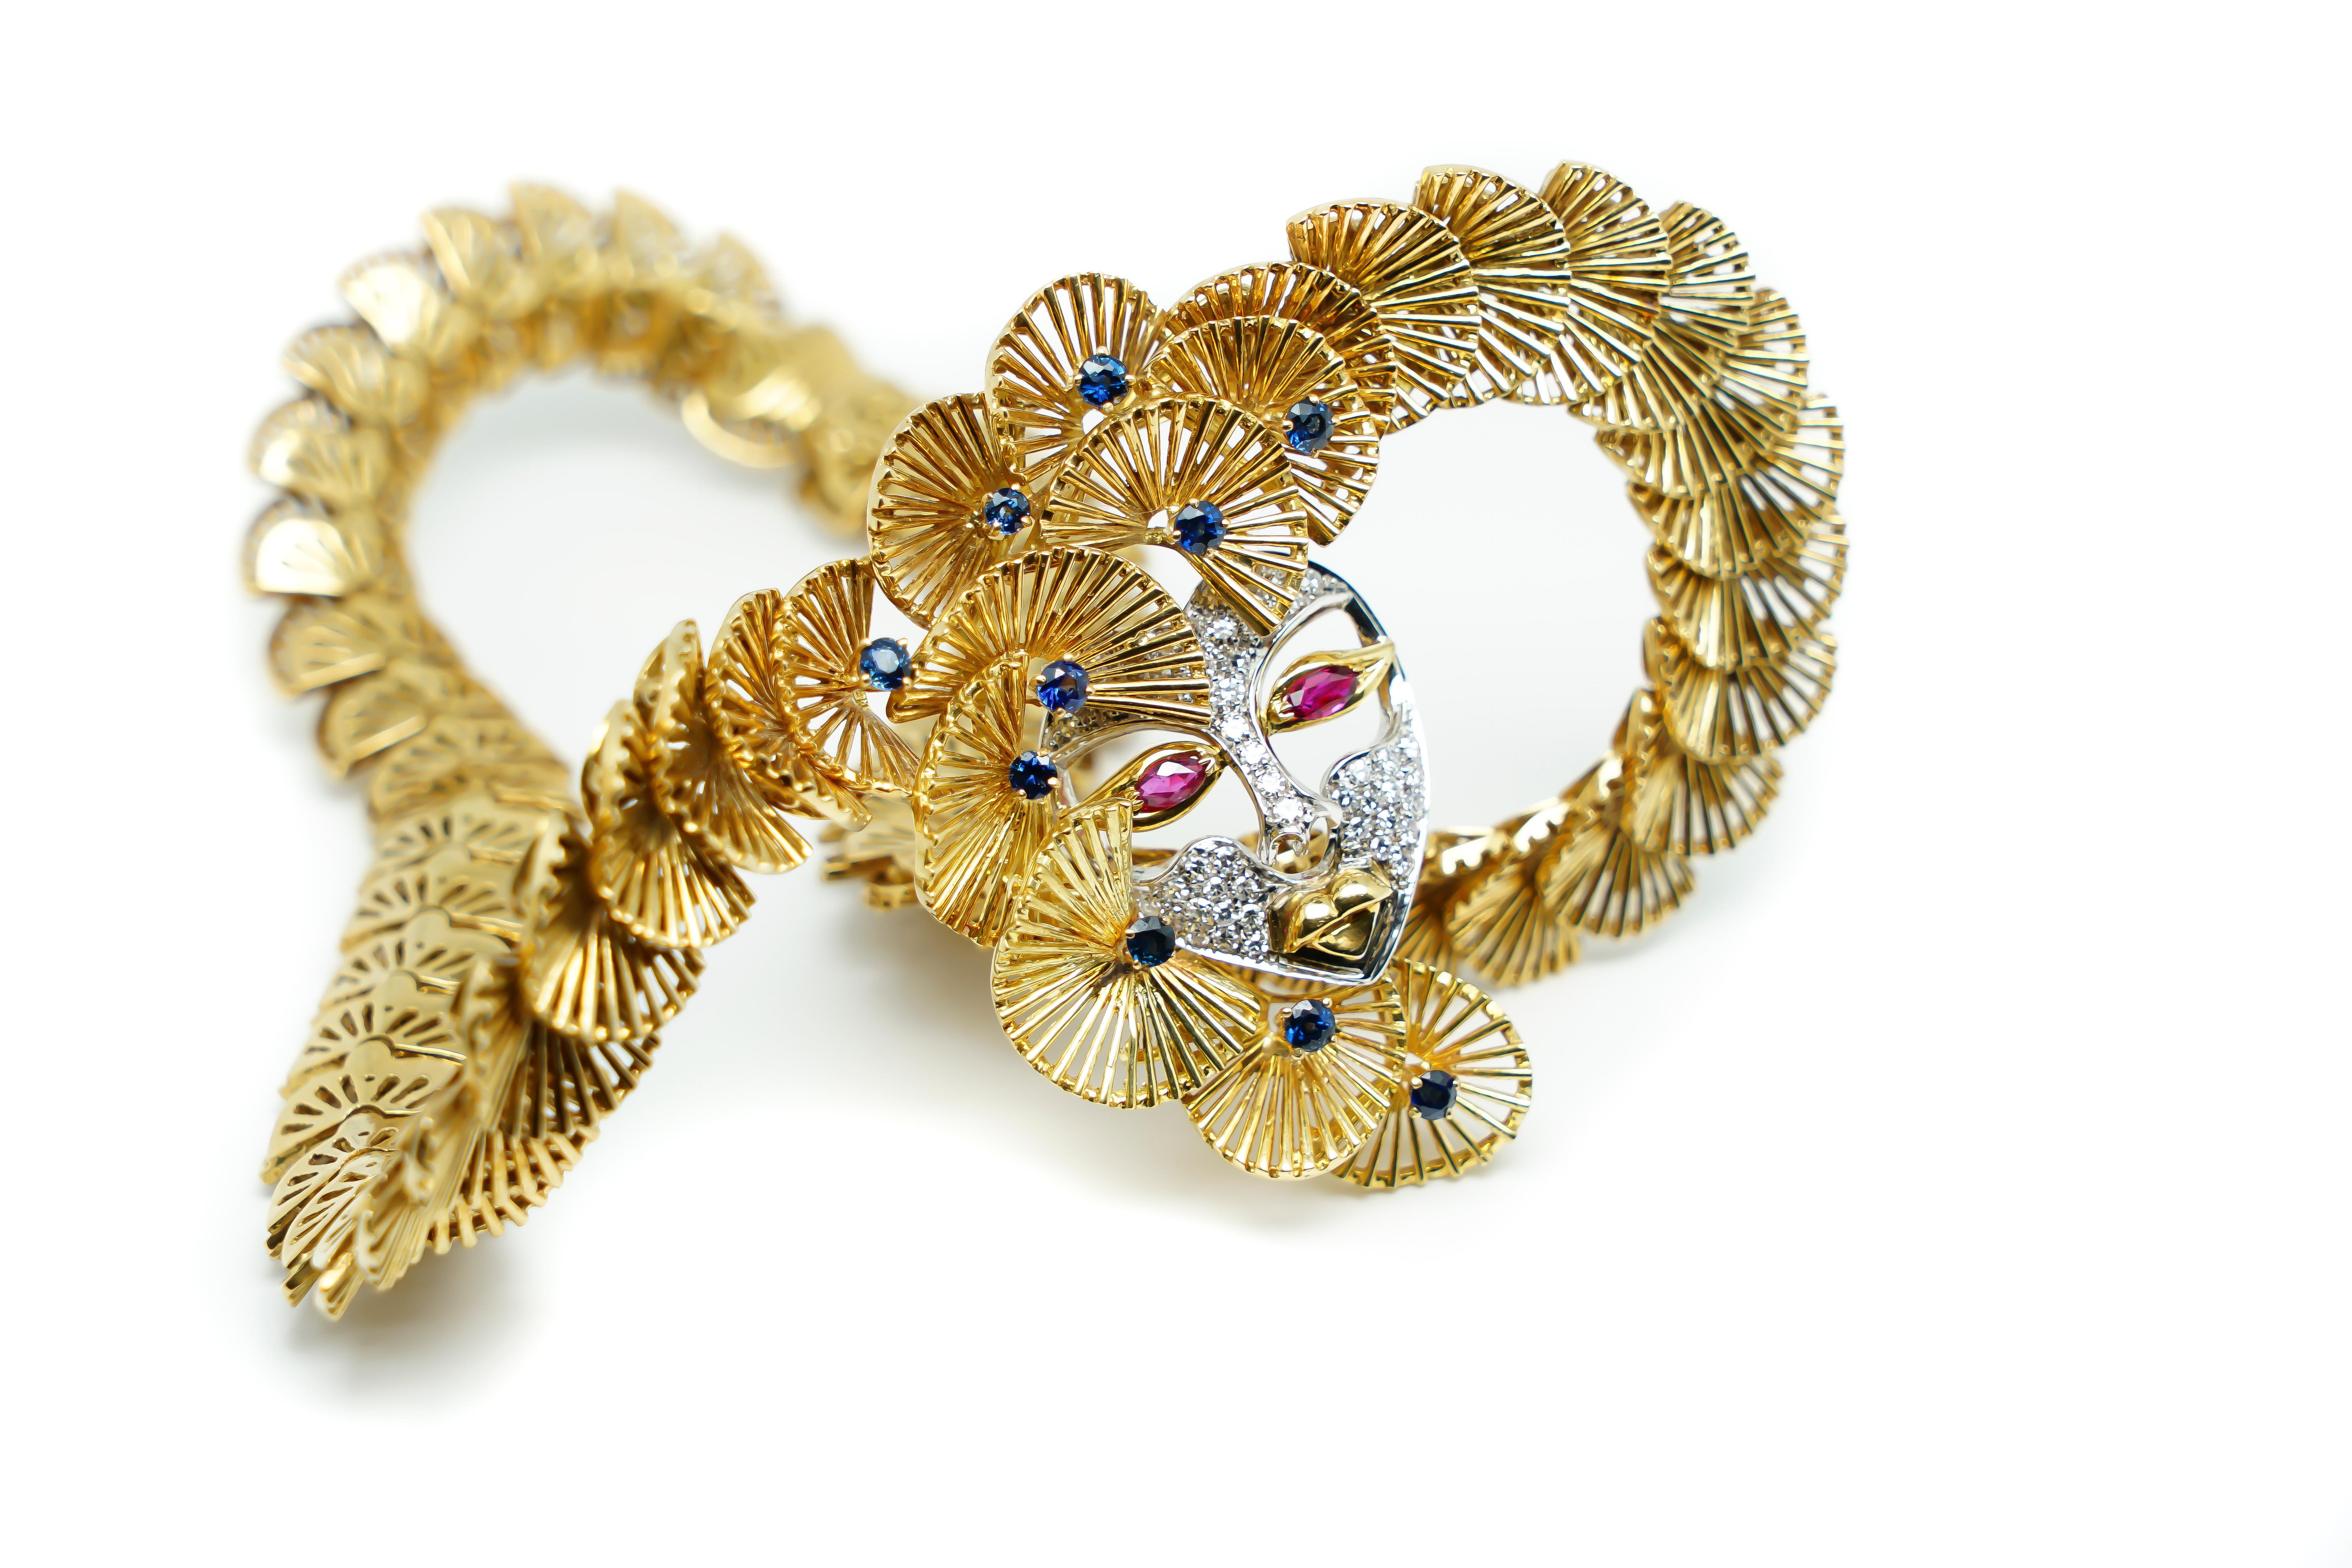 Ornamental and Sculptural Necklace 18 Karat Gold, Sapphires and a Mask filled with Rubies and Diamonds. It's a piece that has a very Elaborated and Original Design with a beautiful detailed structure totally Handmade that makes it Unique and a real